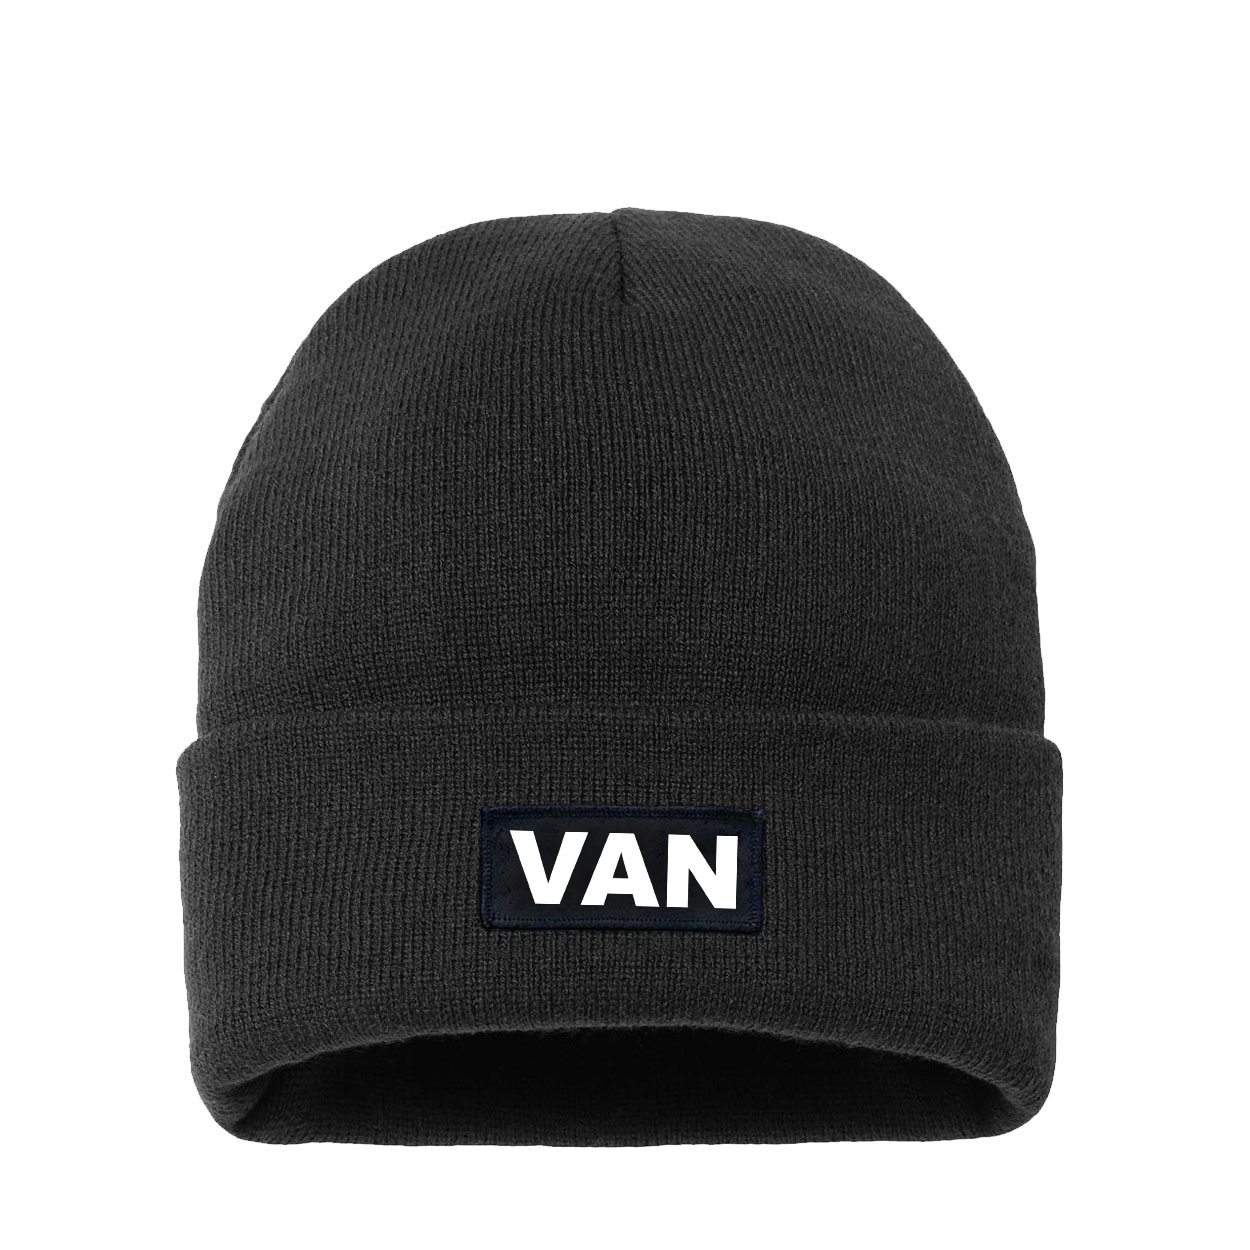 Van Brand Logo Night Out Woven Patch Night Out Sherpa Lined Cuffed Beanie Black